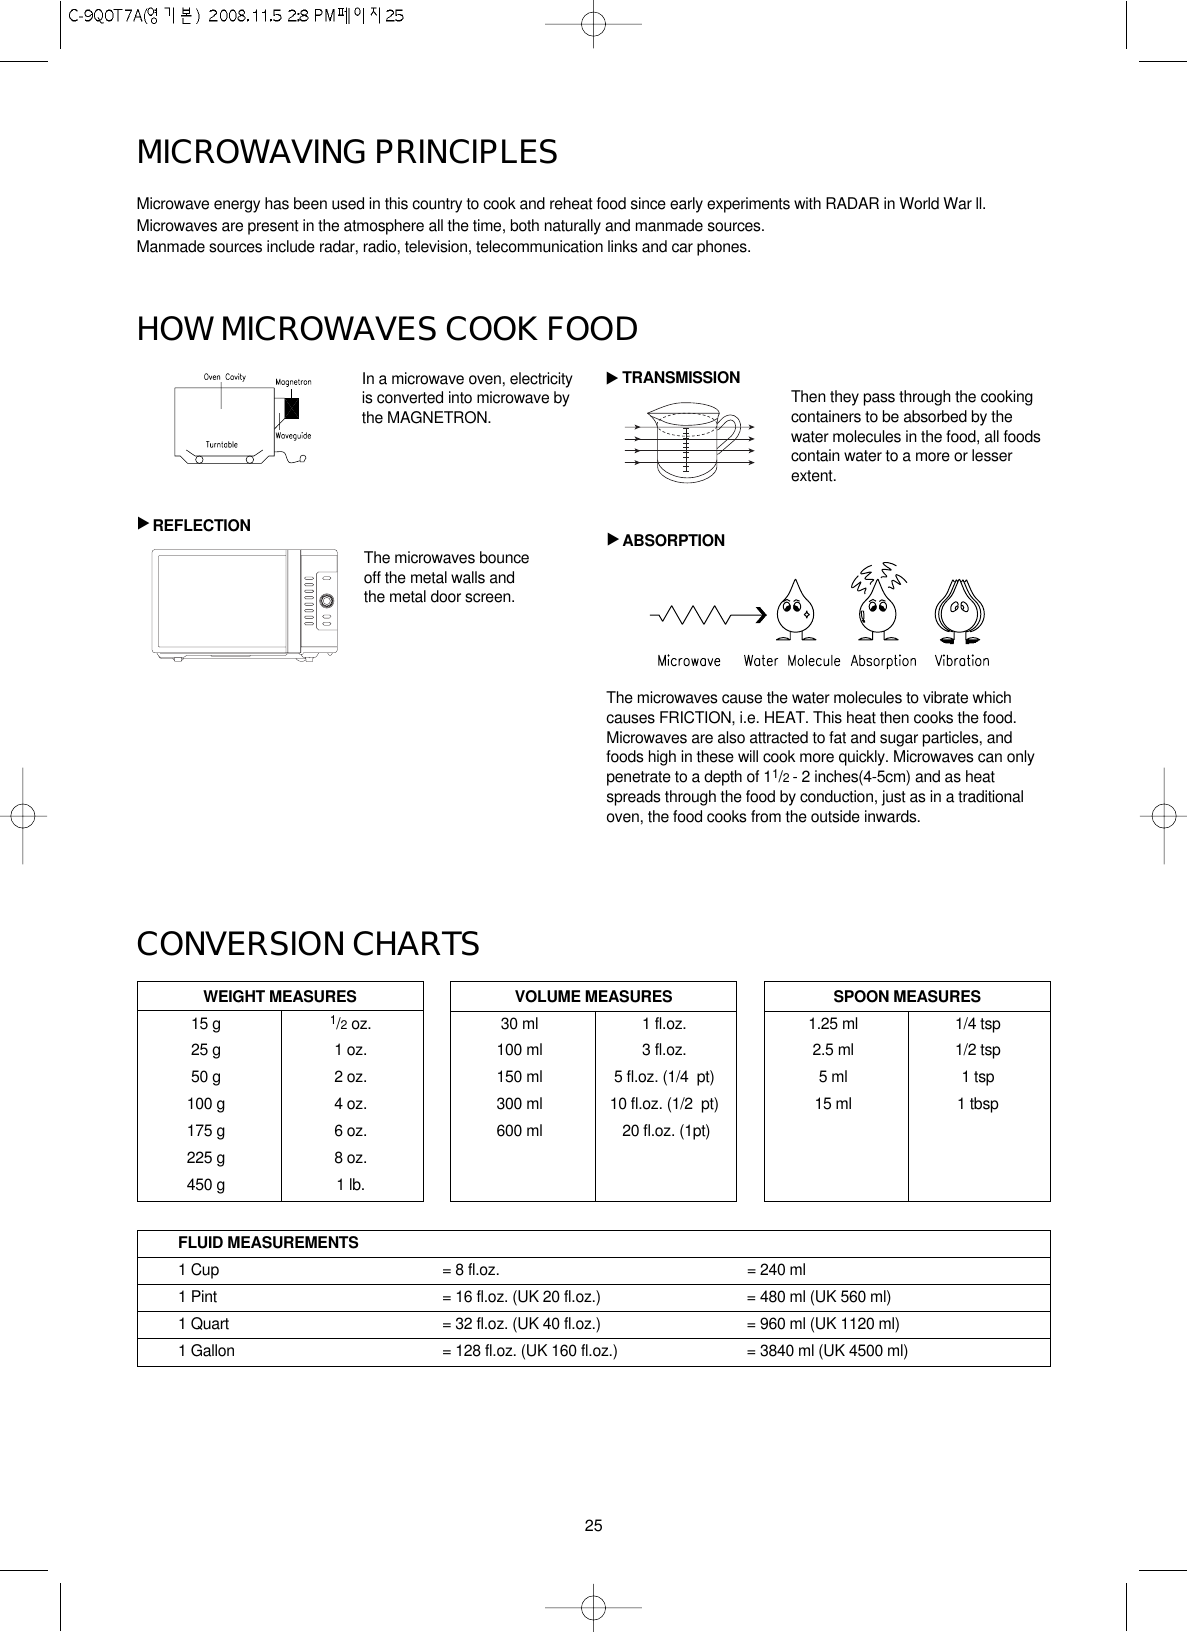 25MICROWAVING PRINCIPLESMicrowave energy has been used in this country to cook and reheat food since early experiments with RADAR in World War ll.Microwaves are present in the atmosphere all the time, both naturally and manmade sources.Manmade sources include radar, radio, television, telecommunication links and car phones.CONVERSION CHARTSIn a microwave oven, electricityis converted into microwave bythe MAGNETRON.REFLECTIONTRANSMISSION Then they pass through the cookingcontainers to be absorbed by thewater molecules in the food, all foodscontain water to a more or lesserextent.ABSORPTIONThe microwaves cause the water molecules to vibrate whichcauses FRICTION, i.e. HEAT. This heat then cooks the food.Microwaves are also attracted to fat and sugar particles, andfoods high in these will cook more quickly. Microwaves can onlypenetrate to a depth of 11/2 - 2 inches(4-5cm) and as heatspreads through the food by conduction, just as in a traditionaloven, the food cooks from the outside inwards.WEIGHT MEASURES15 g 1/2oz.25 g 1 oz.50 g 2 oz.100 g 4 oz.175 g 6 oz.225 g 8 oz.450 g 1 lb.HOW MICROWAVES COOK FOOD▲▲▲VOLUME MEASURES30 ml 1 fl.oz.100 ml 3 fl.oz.150 ml 5 fl.oz. (1/4  pt)300 ml 10 fl.oz. (1/2  pt)600 ml 20 fl.oz. (1pt)SPOON MEASURES1.25 ml 1/4 tsp2.5 ml 1/2 tsp5 ml 1 tsp15 ml 1 tbspFLUID MEASUREMENTS1 Cup = 8 fl.oz. = 240 ml1 Pint = 16 fl.oz. (UK 20 fl.oz.) = 480 ml (UK 560 ml)1 Quart = 32 fl.oz. (UK 40 fl.oz.) = 960 ml (UK 1120 ml)1 Gallon = 128 fl.oz. (UK 160 fl.oz.) = 3840 ml (UK 4500 ml)The microwaves bounceoff the metal walls andthe metal door screen.